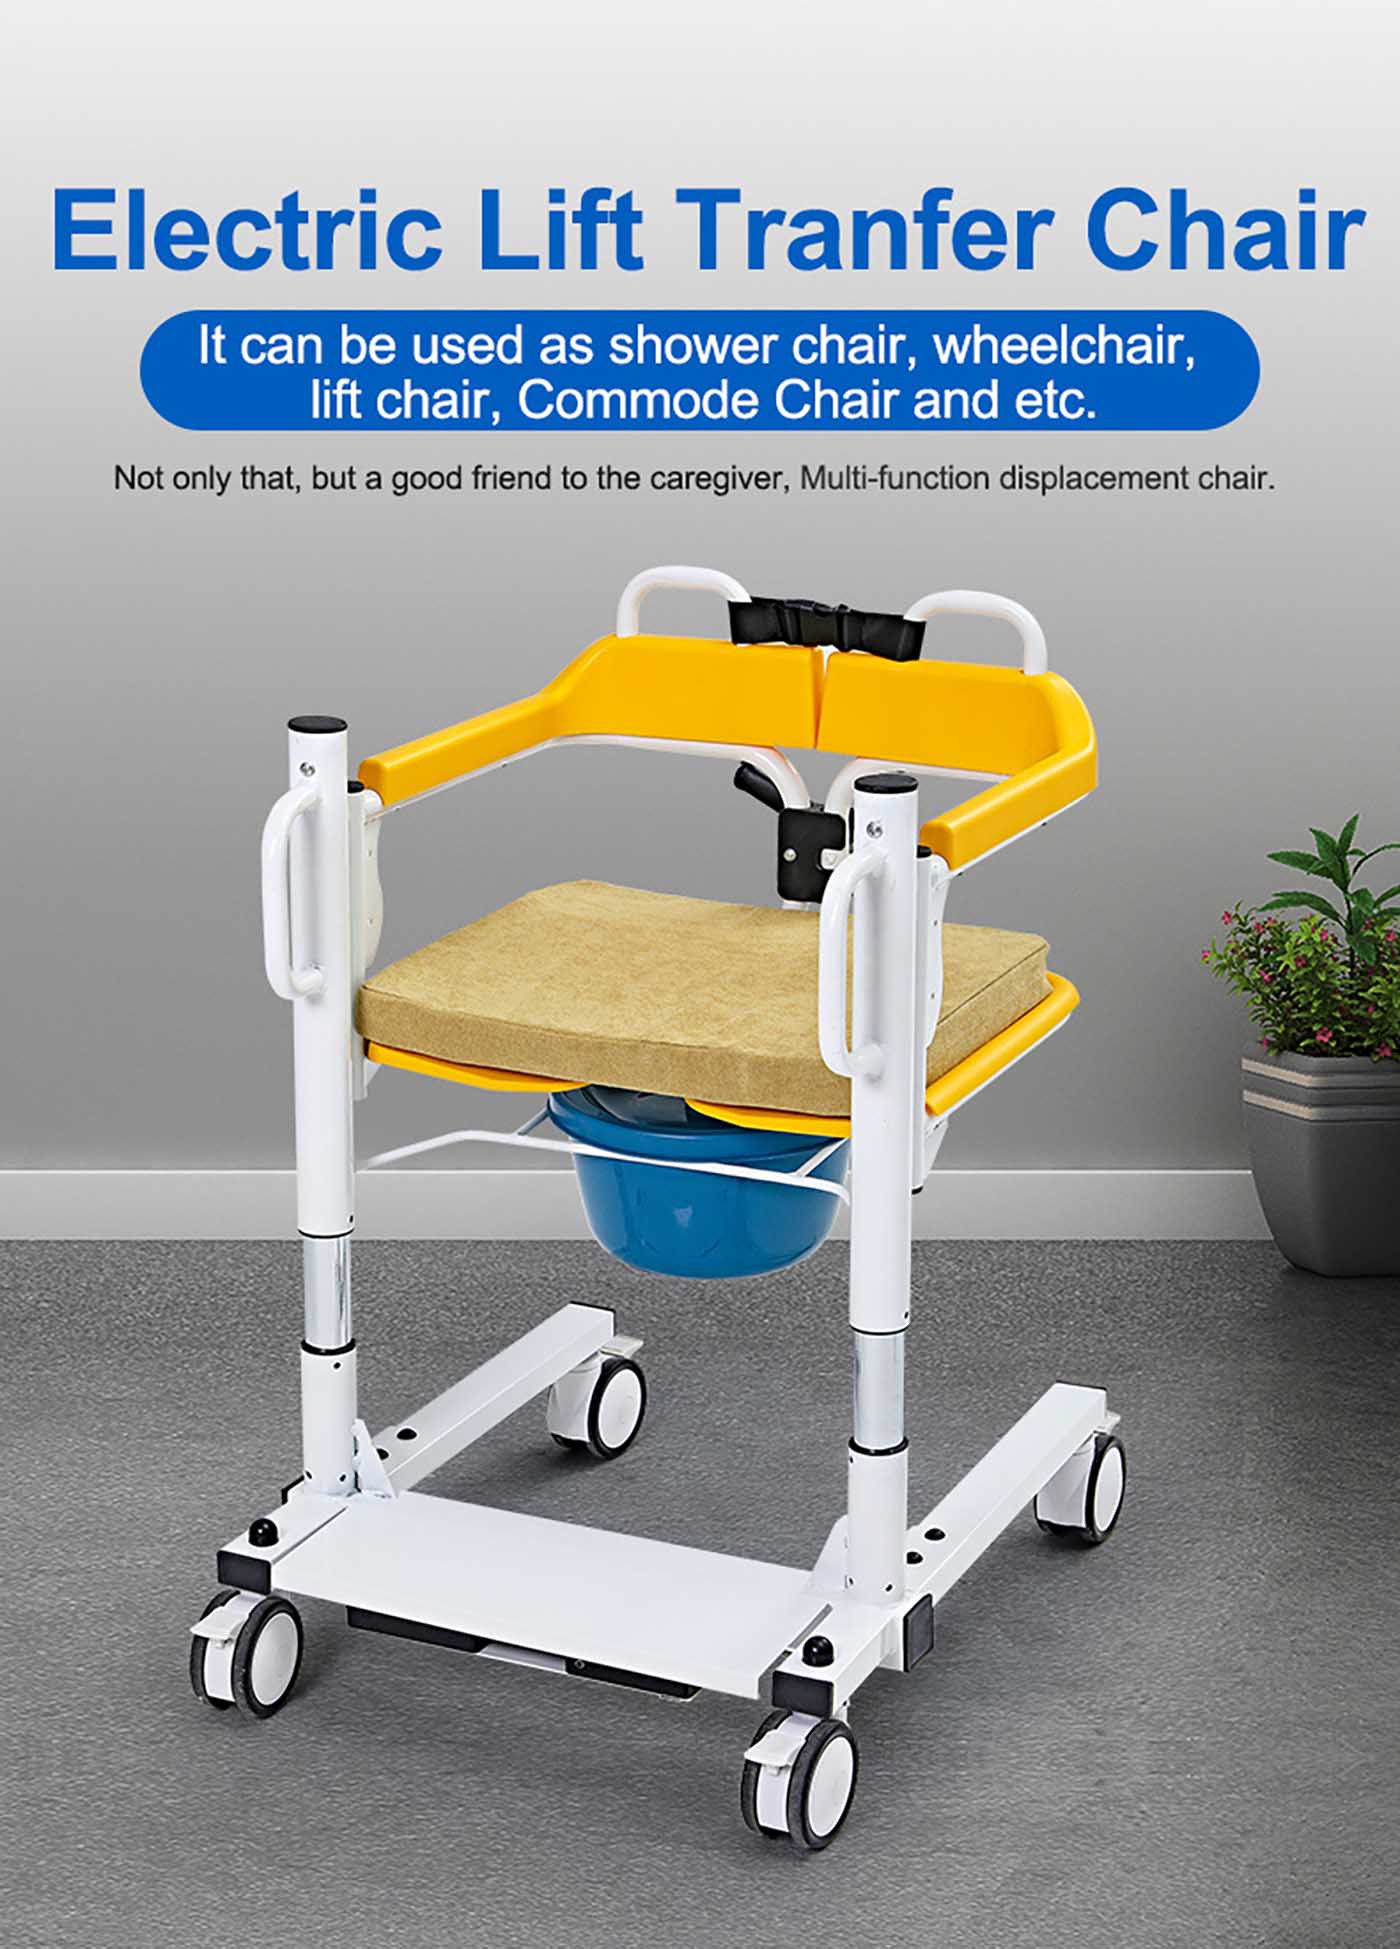 ZW389D Electric Lift Transfer Chair-4 (6)